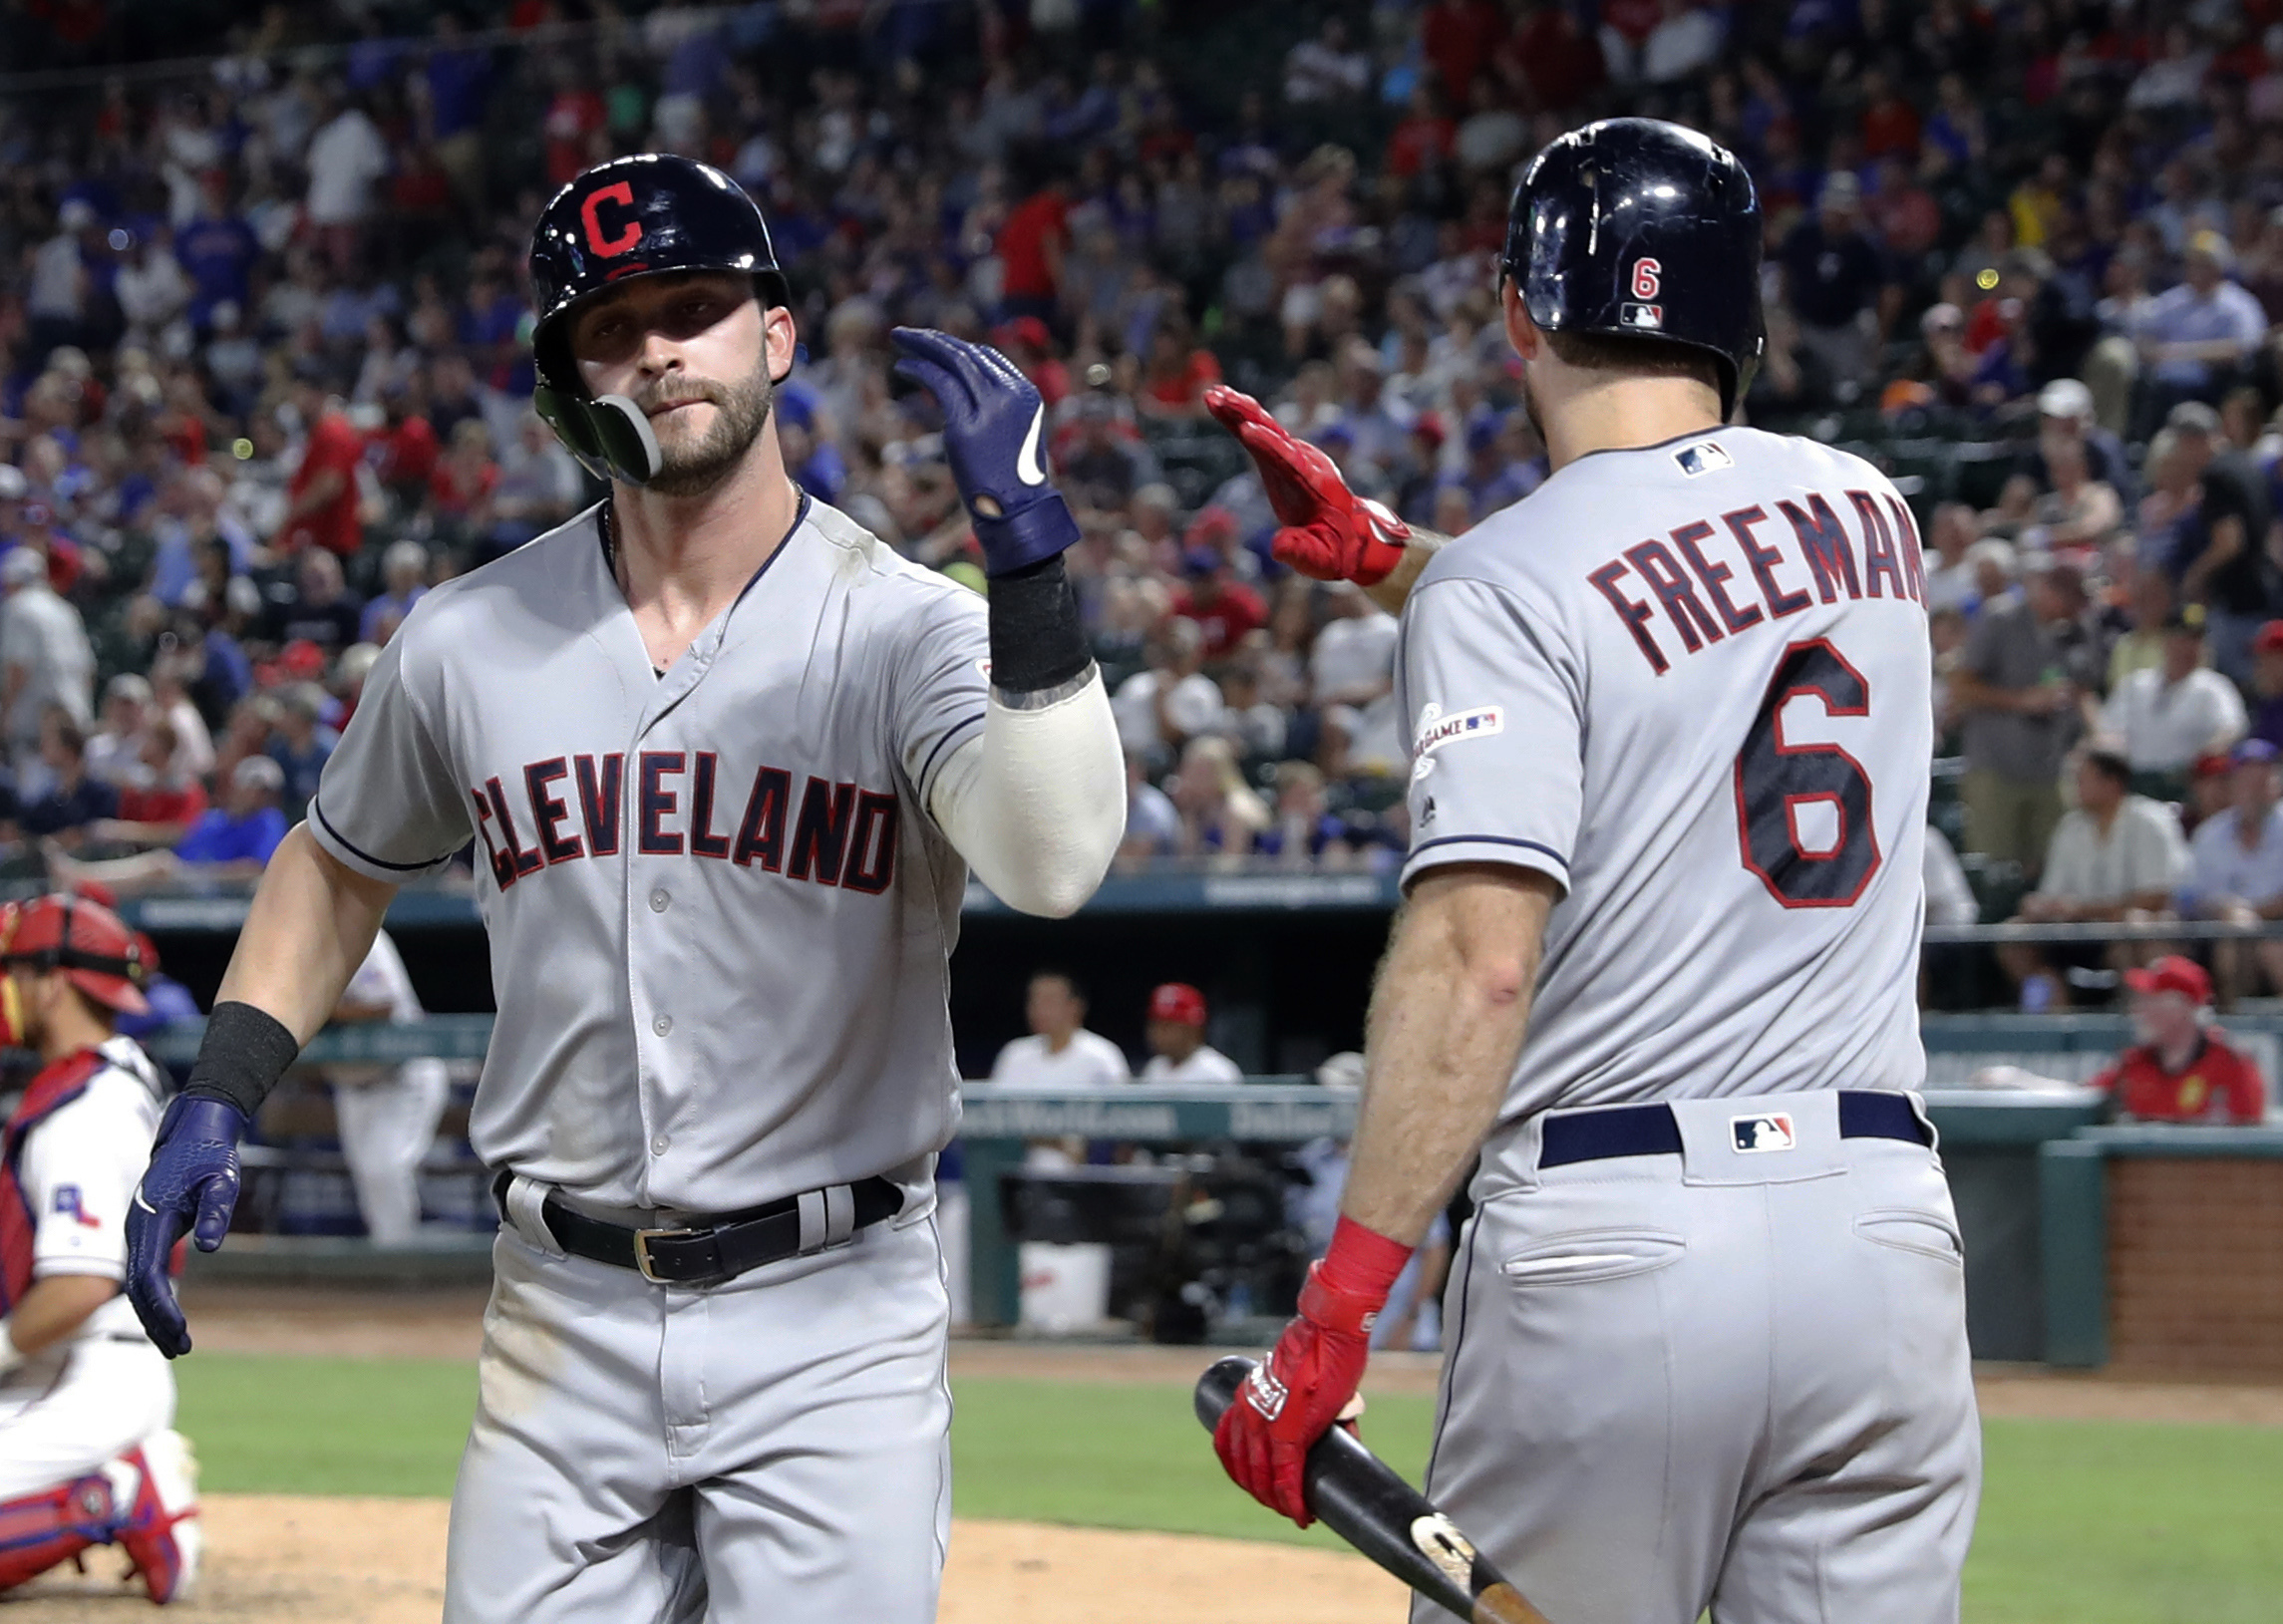 Indians hit 3 straight HRs, Plesac shuts down Rangers, 10-3